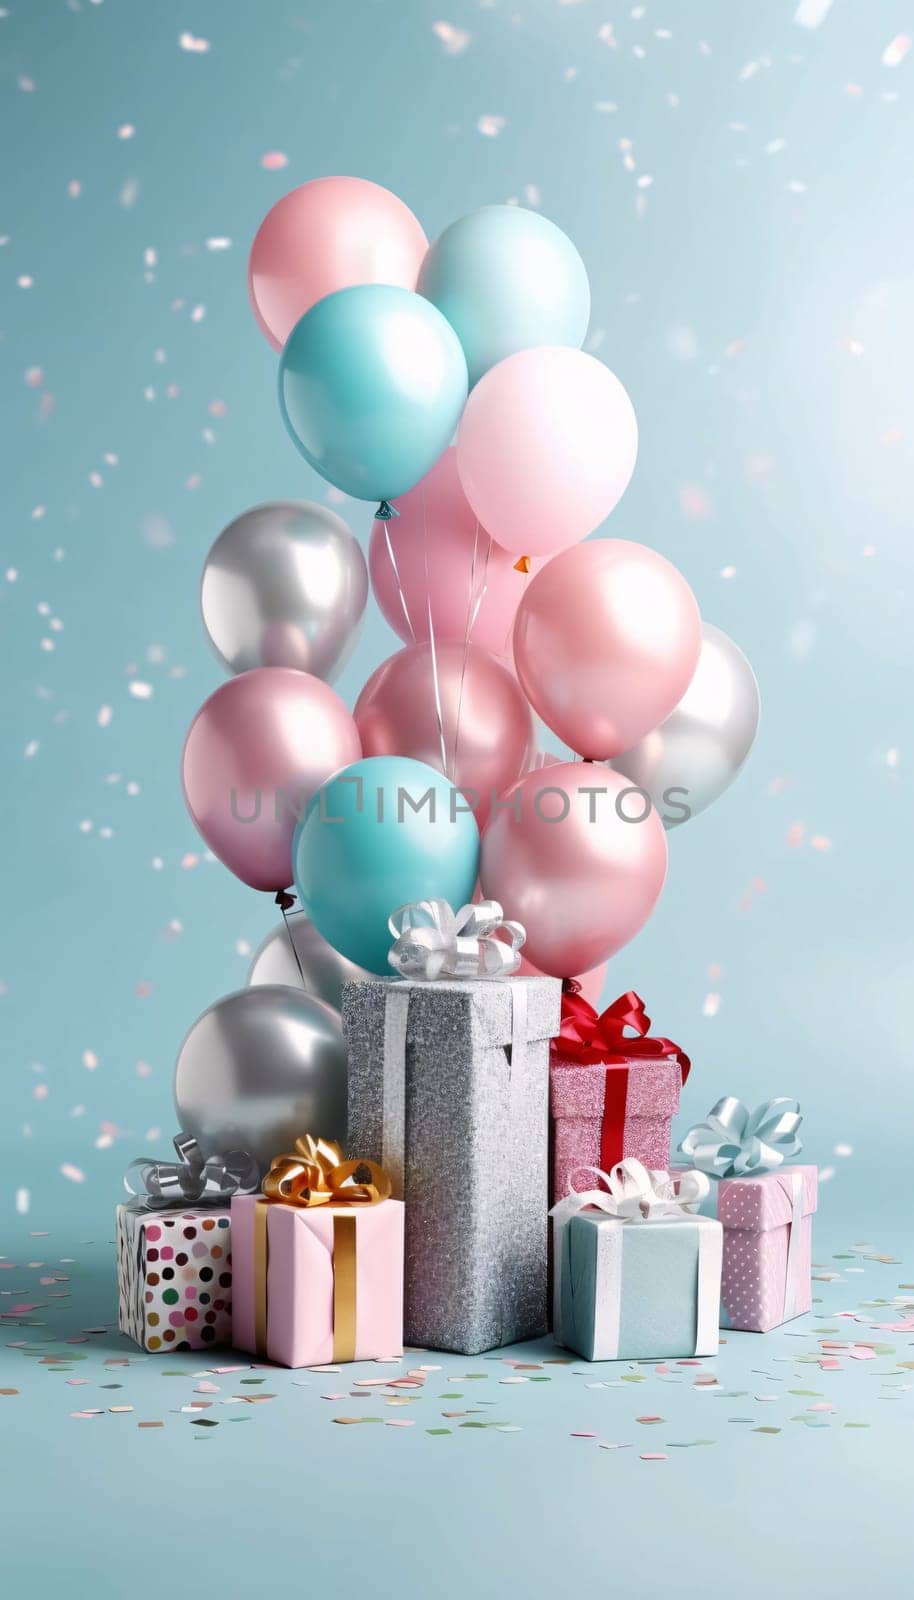 Silver and blue balloons and gifts with bow, confetti, bright background.Valentine's Day banner with space for your own content. Heart as a symbol of affection and love.